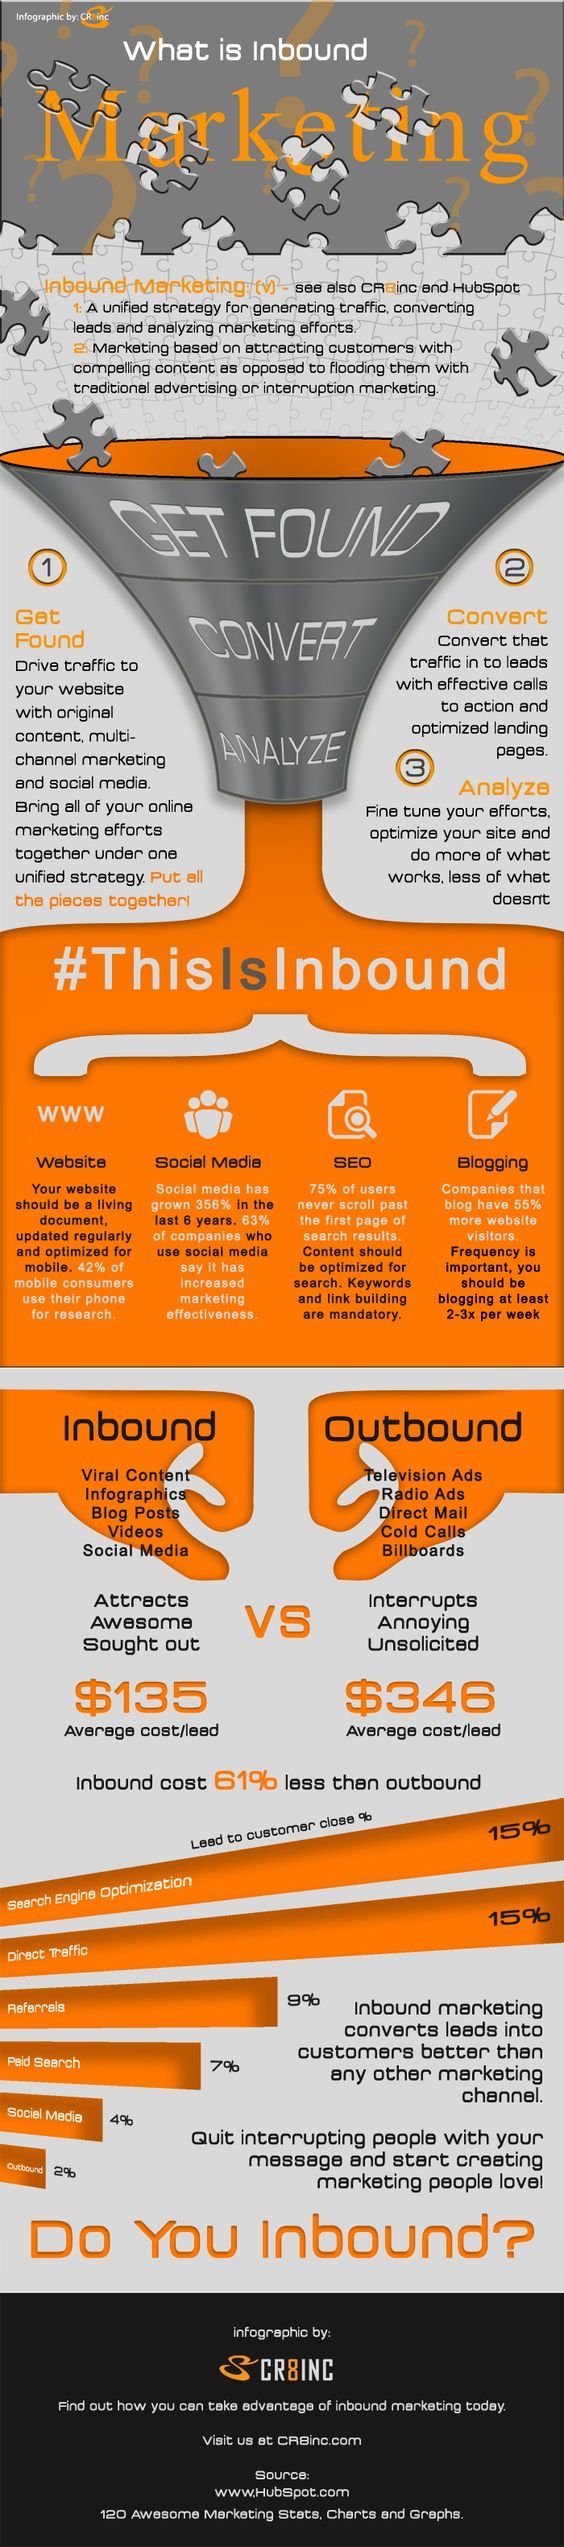 What_is_Inbound_Marketing_All_ About_Infographic